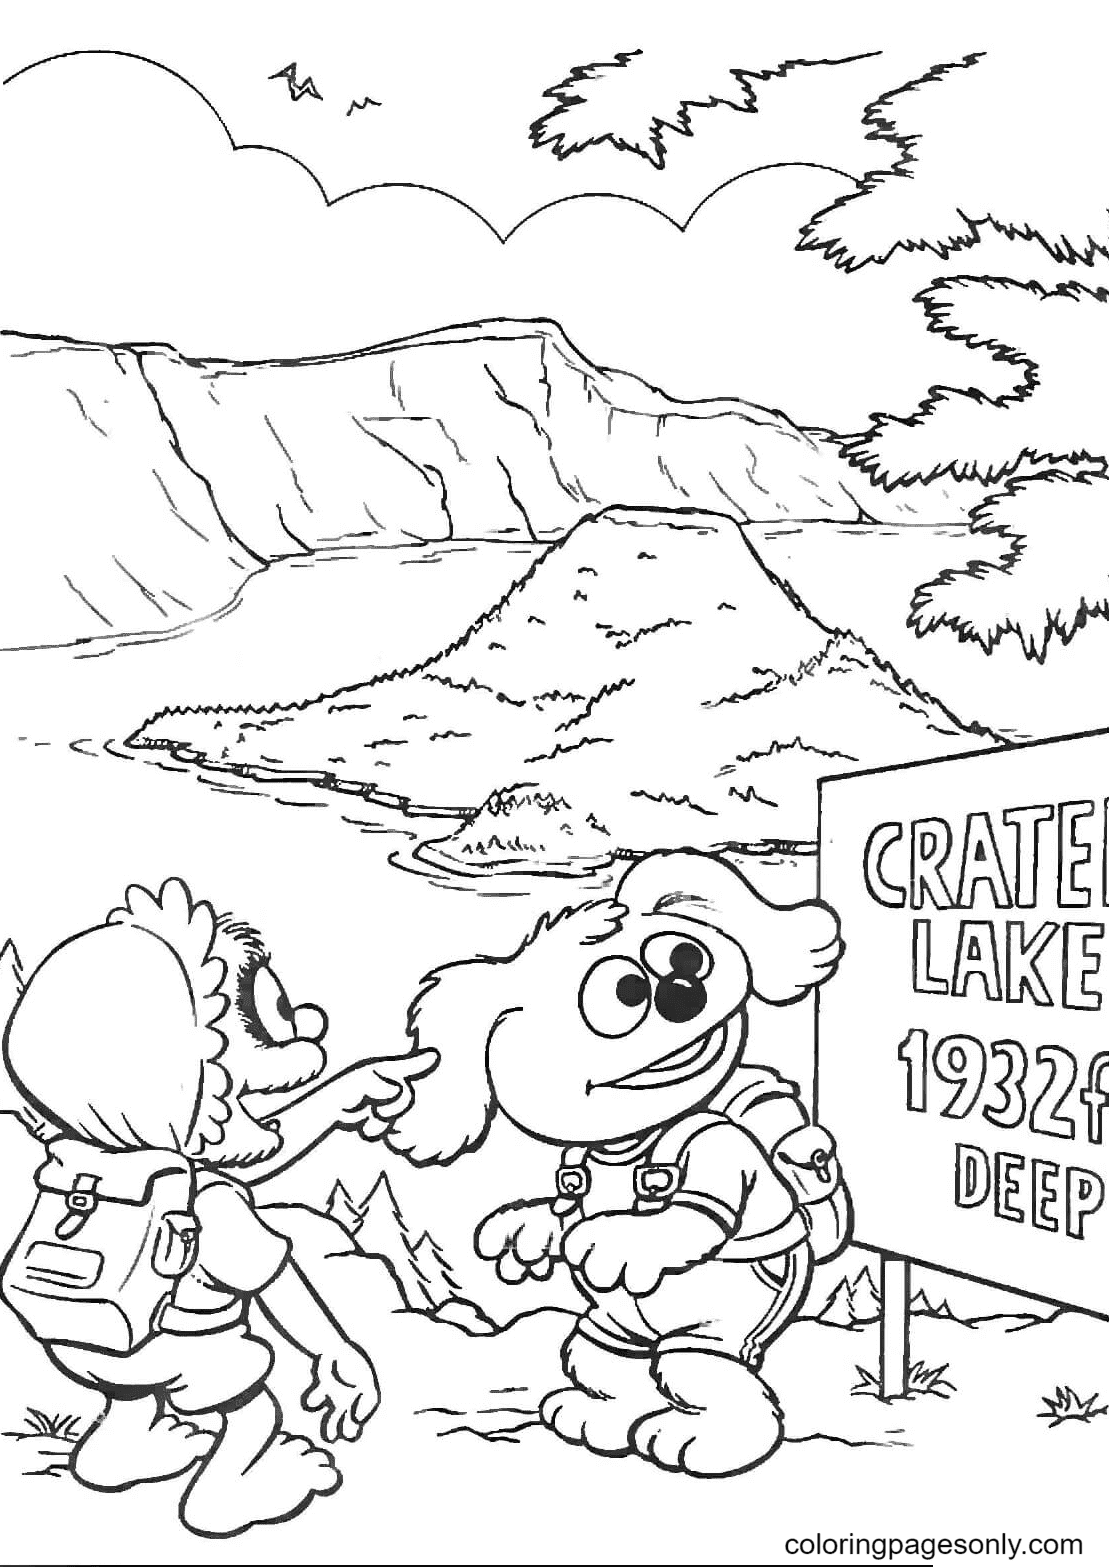 Animal and Rowlf on a Crater lake Coloring Page